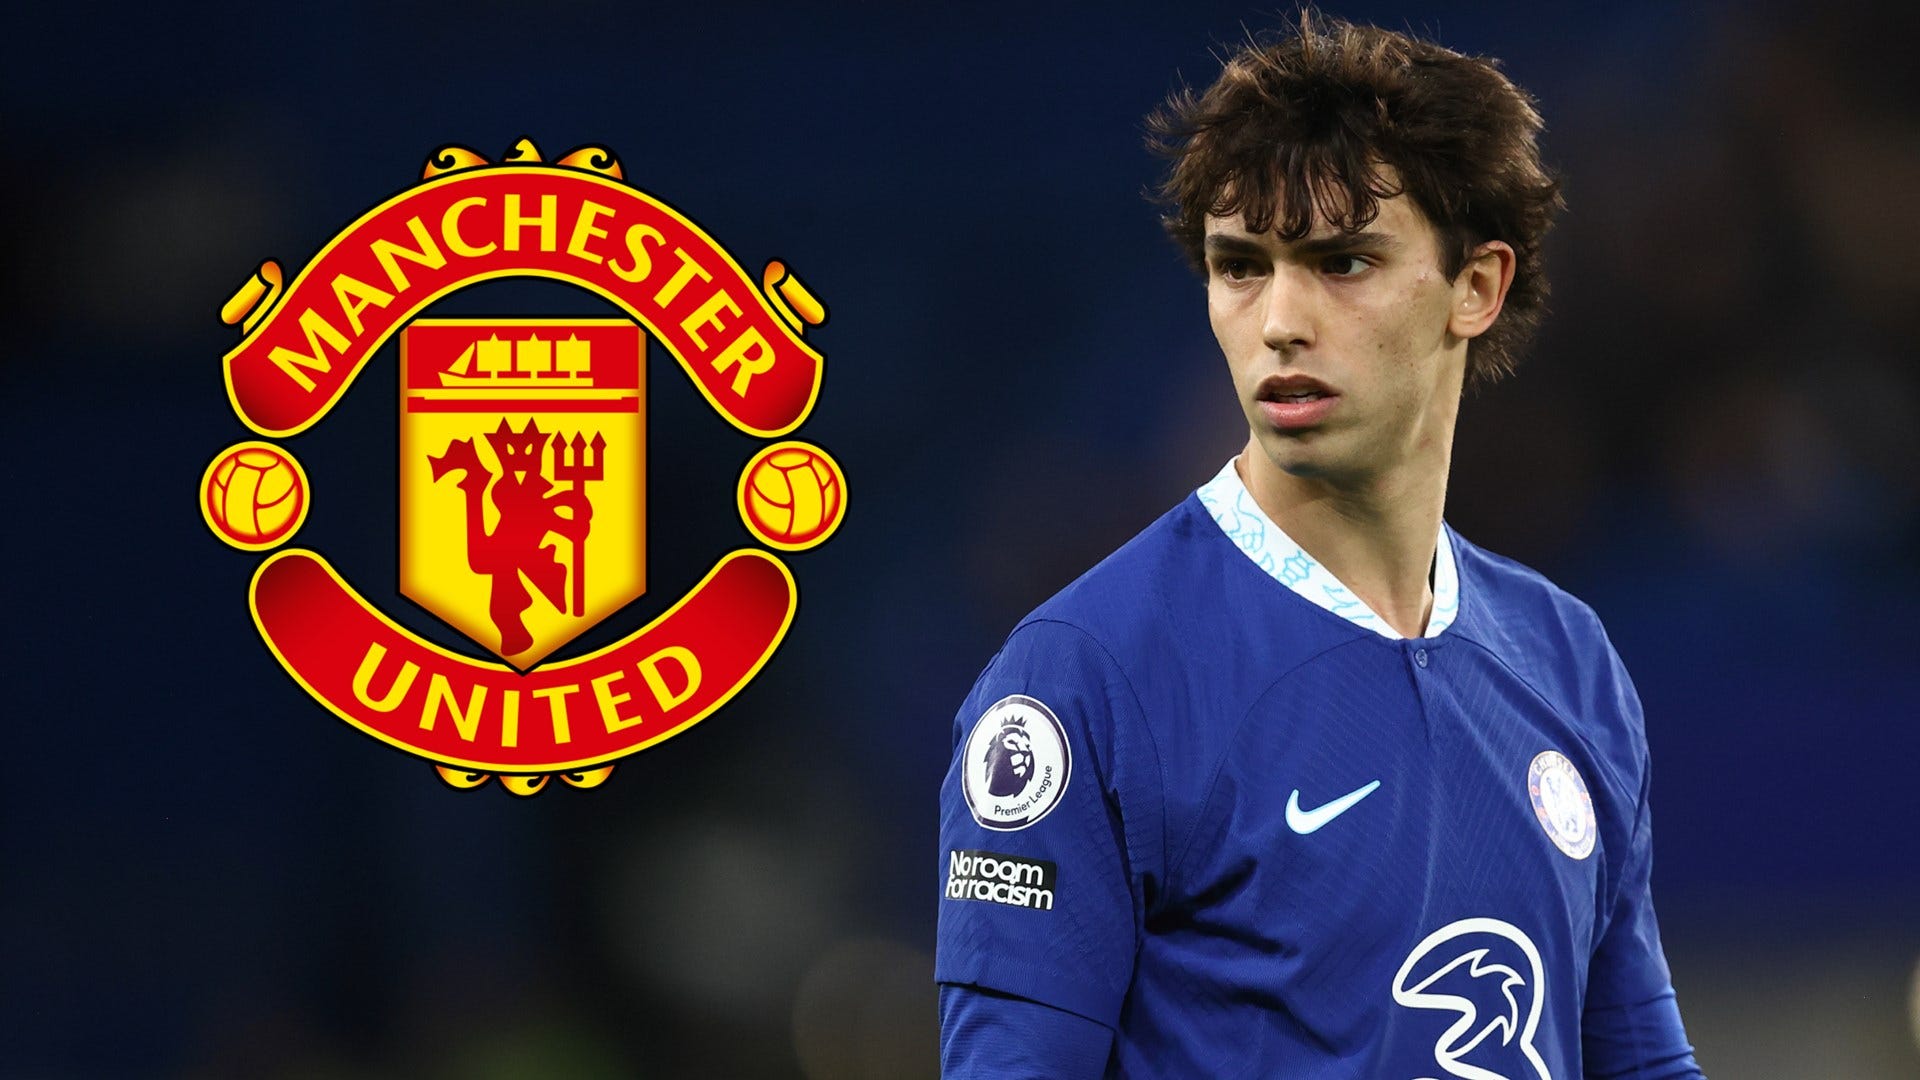 Joao Felix could move to Man United